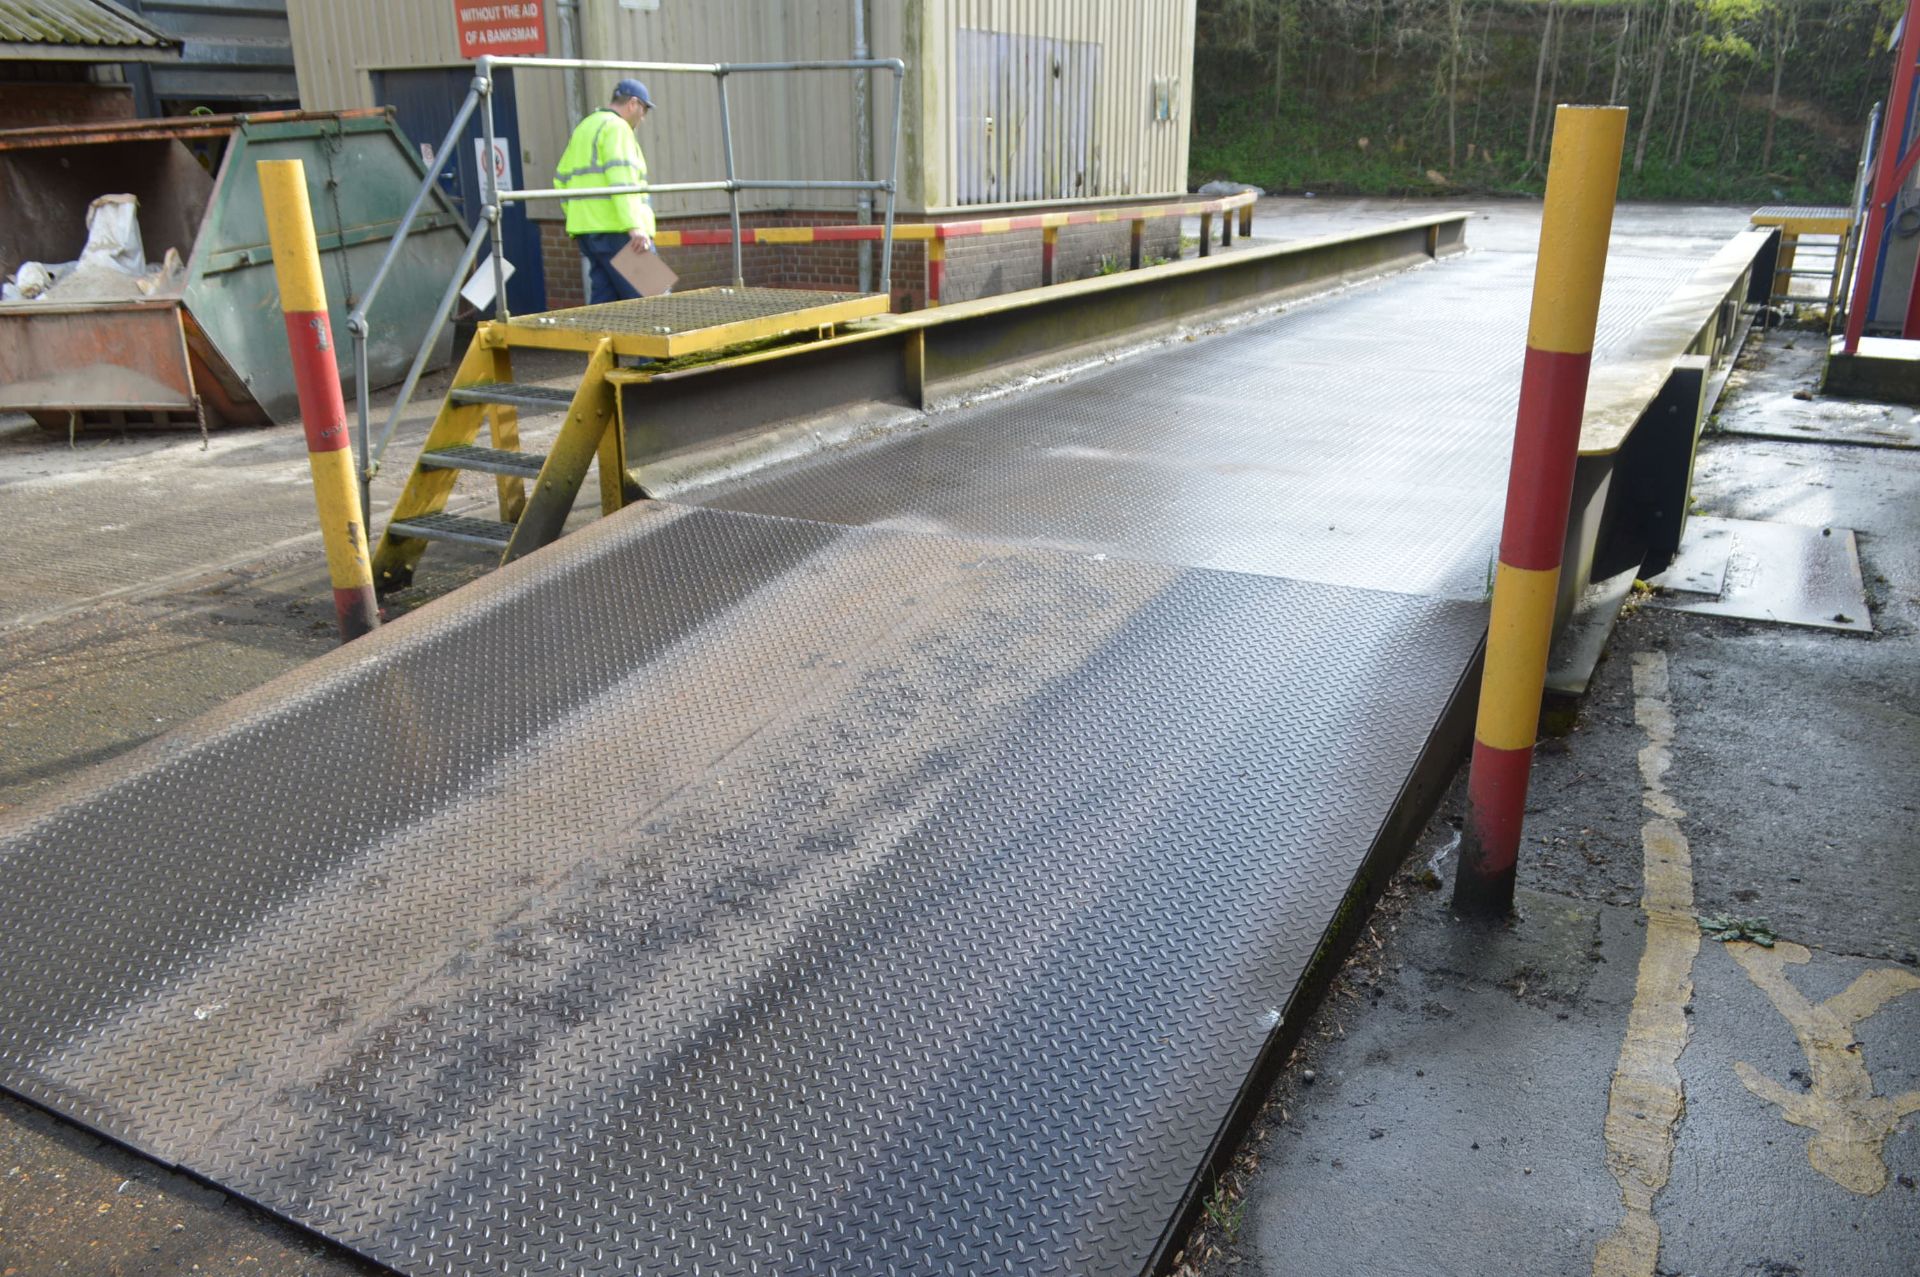 50,000kg cap. OVER SURFACE LOADCELL WEIGHBRIDGE, approx. 15m x 2.95m, with four loadcells, chequer - Image 2 of 8